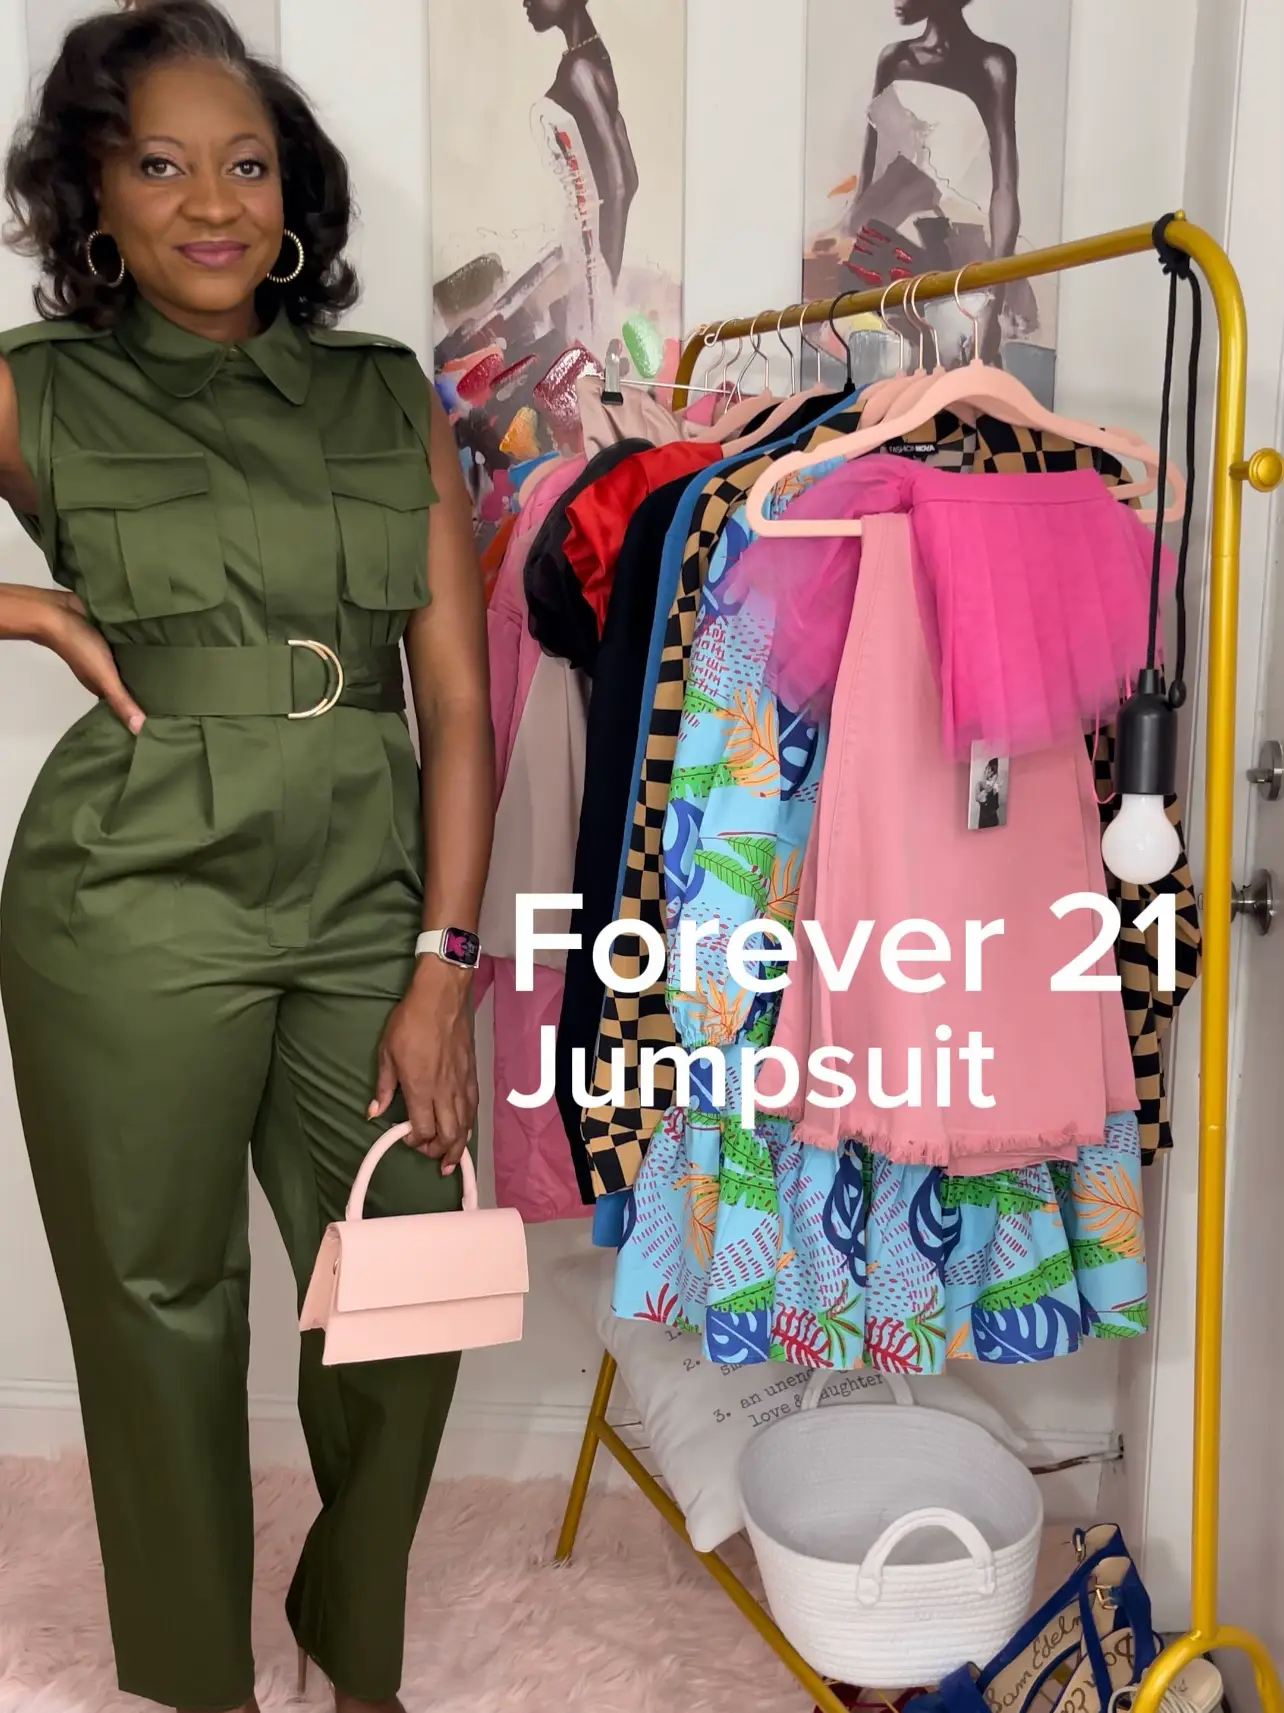 Forever 21 Jumpsuit, Gallery posted by MimiDesulme